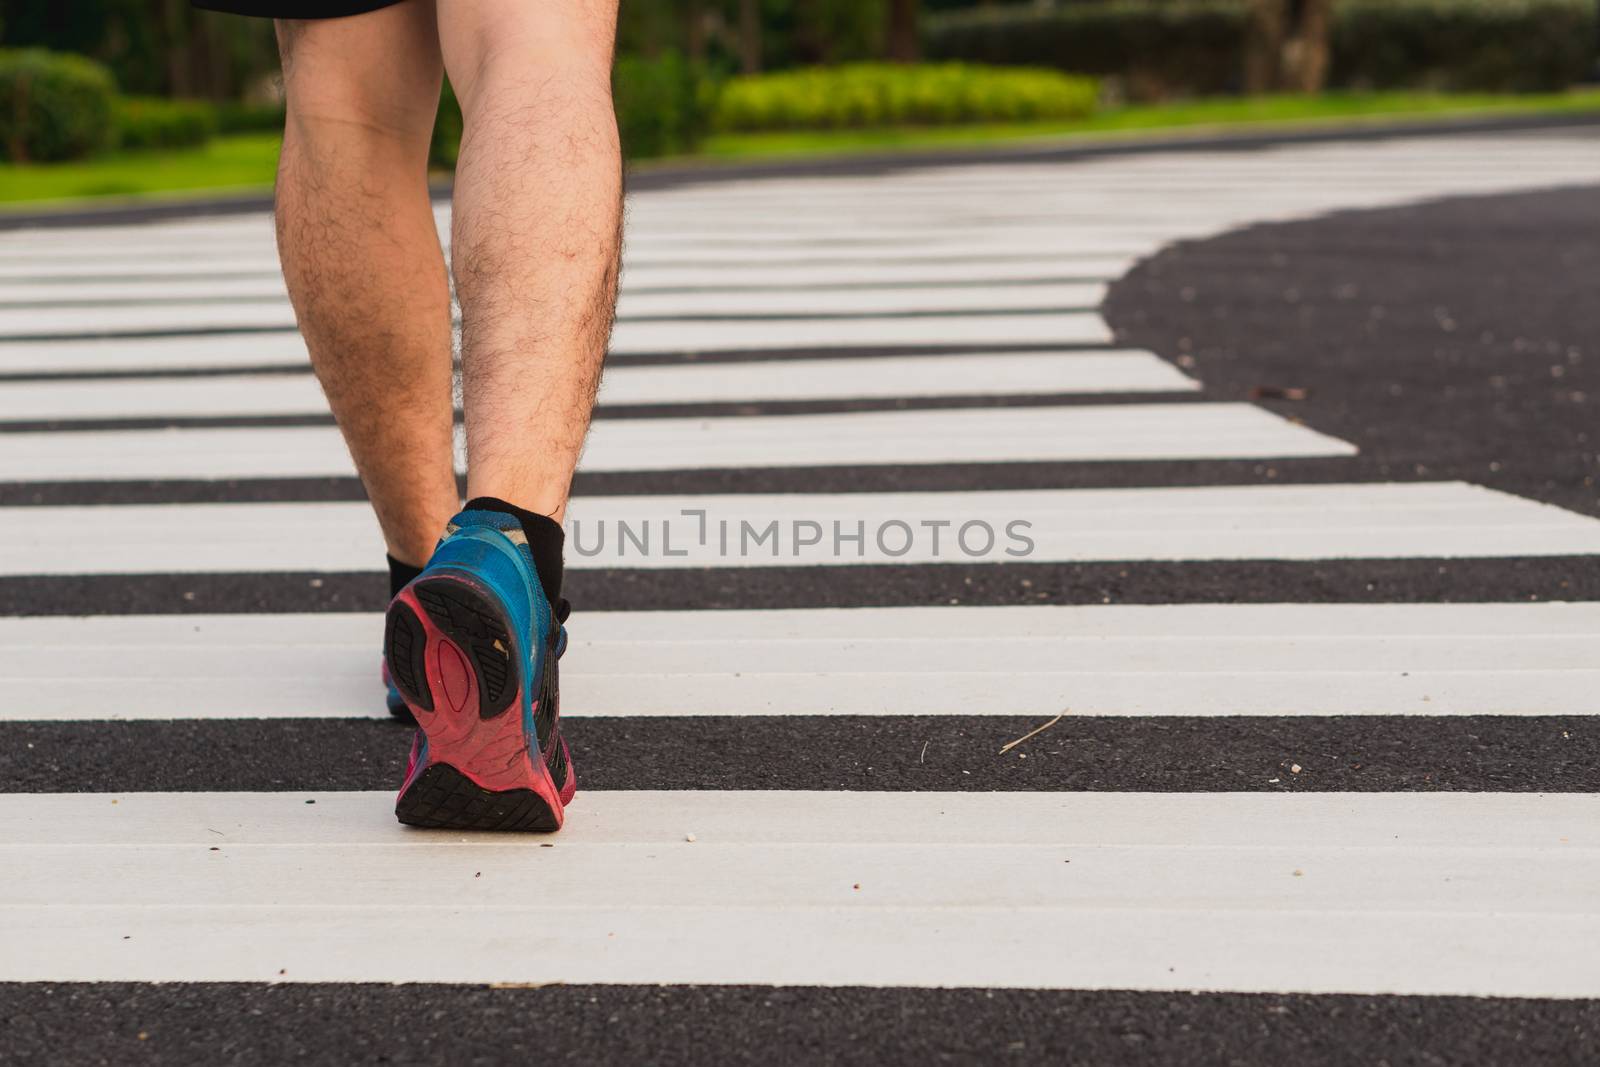 Closeup shoe. Male legs walking on the zebra crossing track. Safety road crossing concept